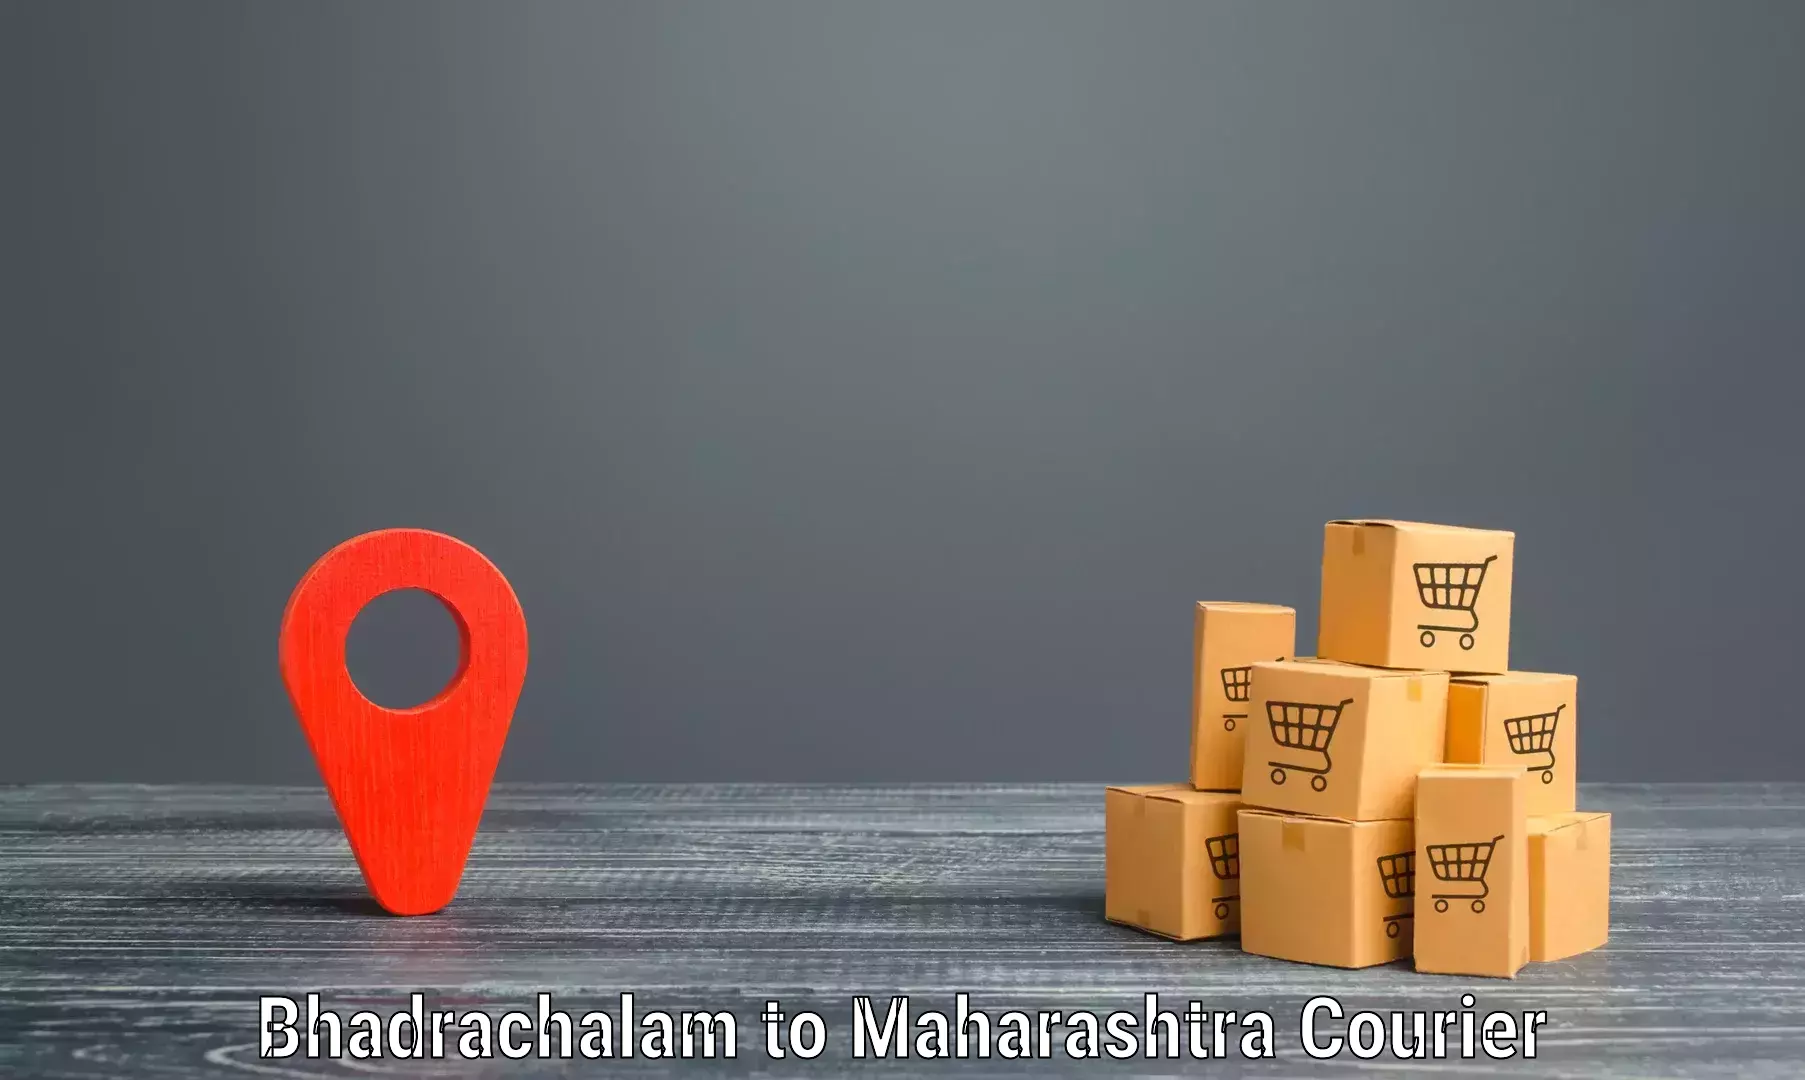 State-of-the-art courier technology Bhadrachalam to Andheri